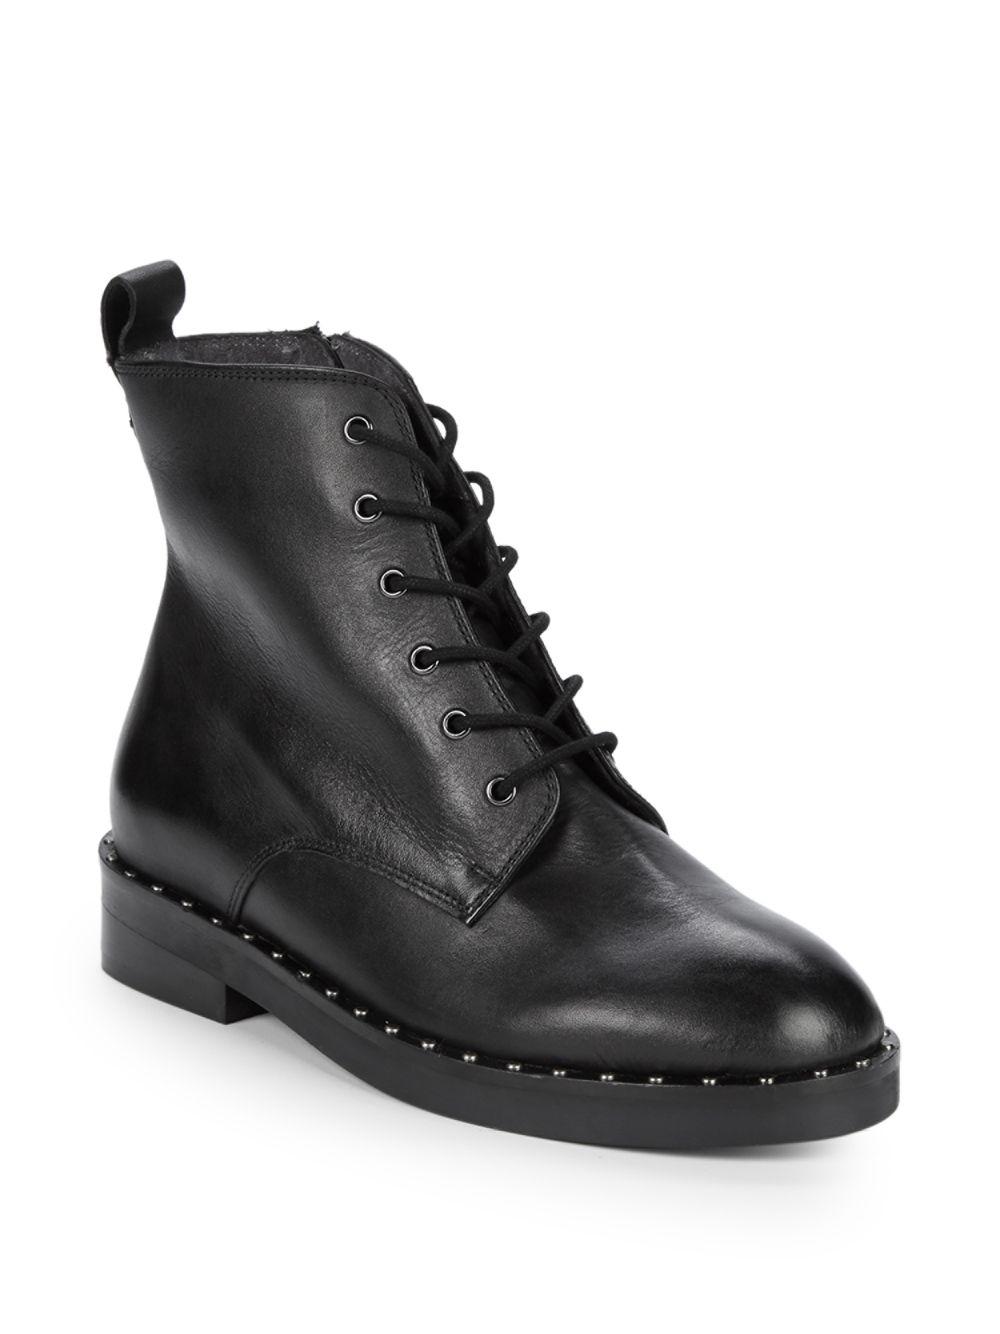 Seychelles Accountability Leather Combat Boots in Black - Lyst